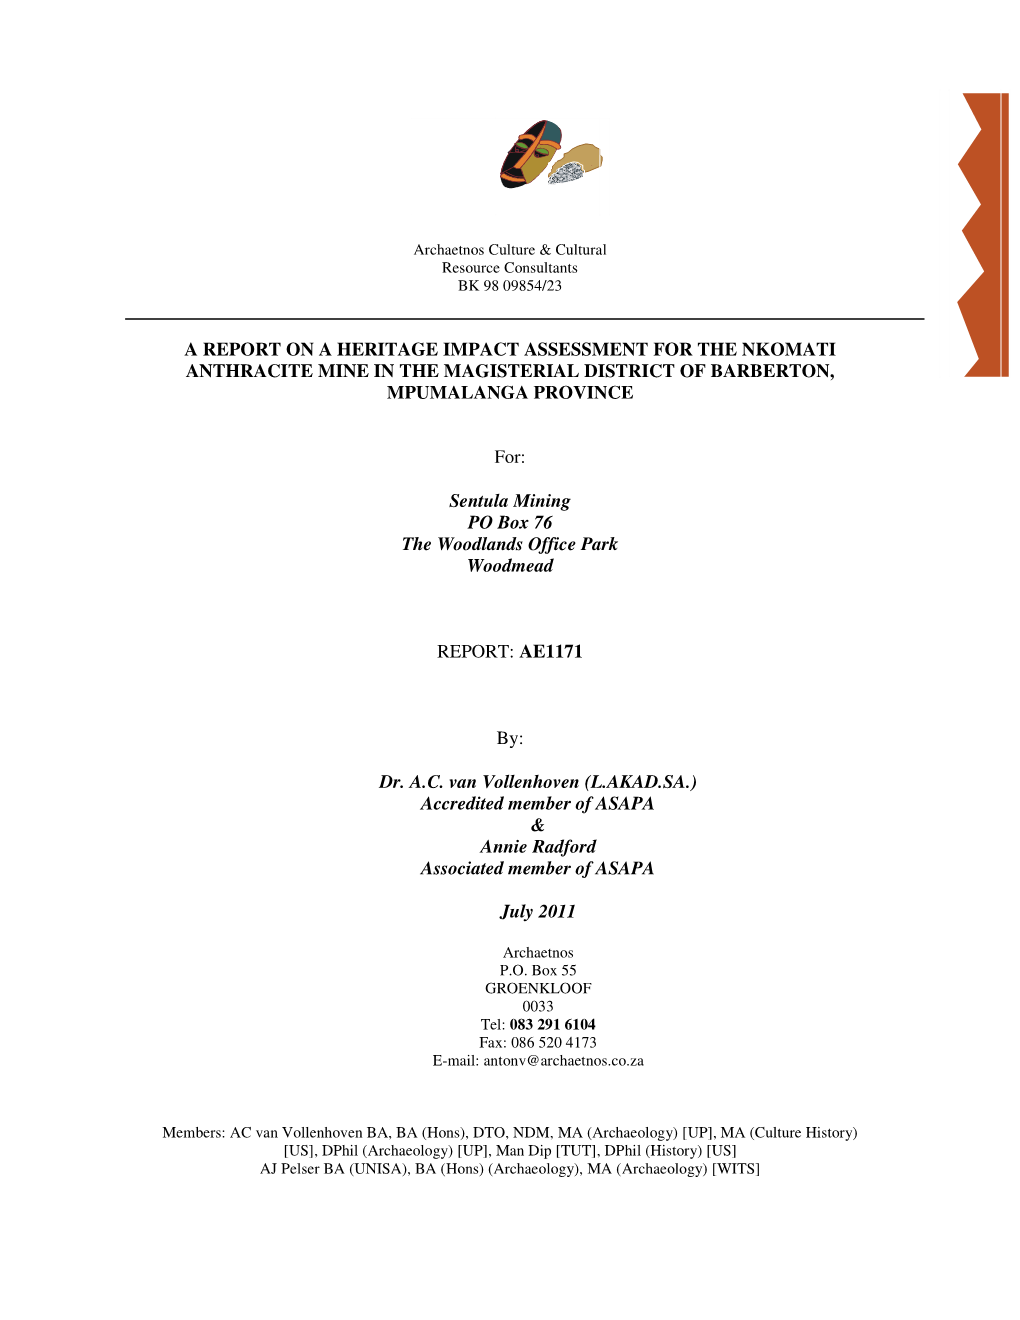 A Report on a Heritage Impact Assessment for the Nkomati Anthracite Mine in the Magisterial District of Barberton, Mpumalanga Province